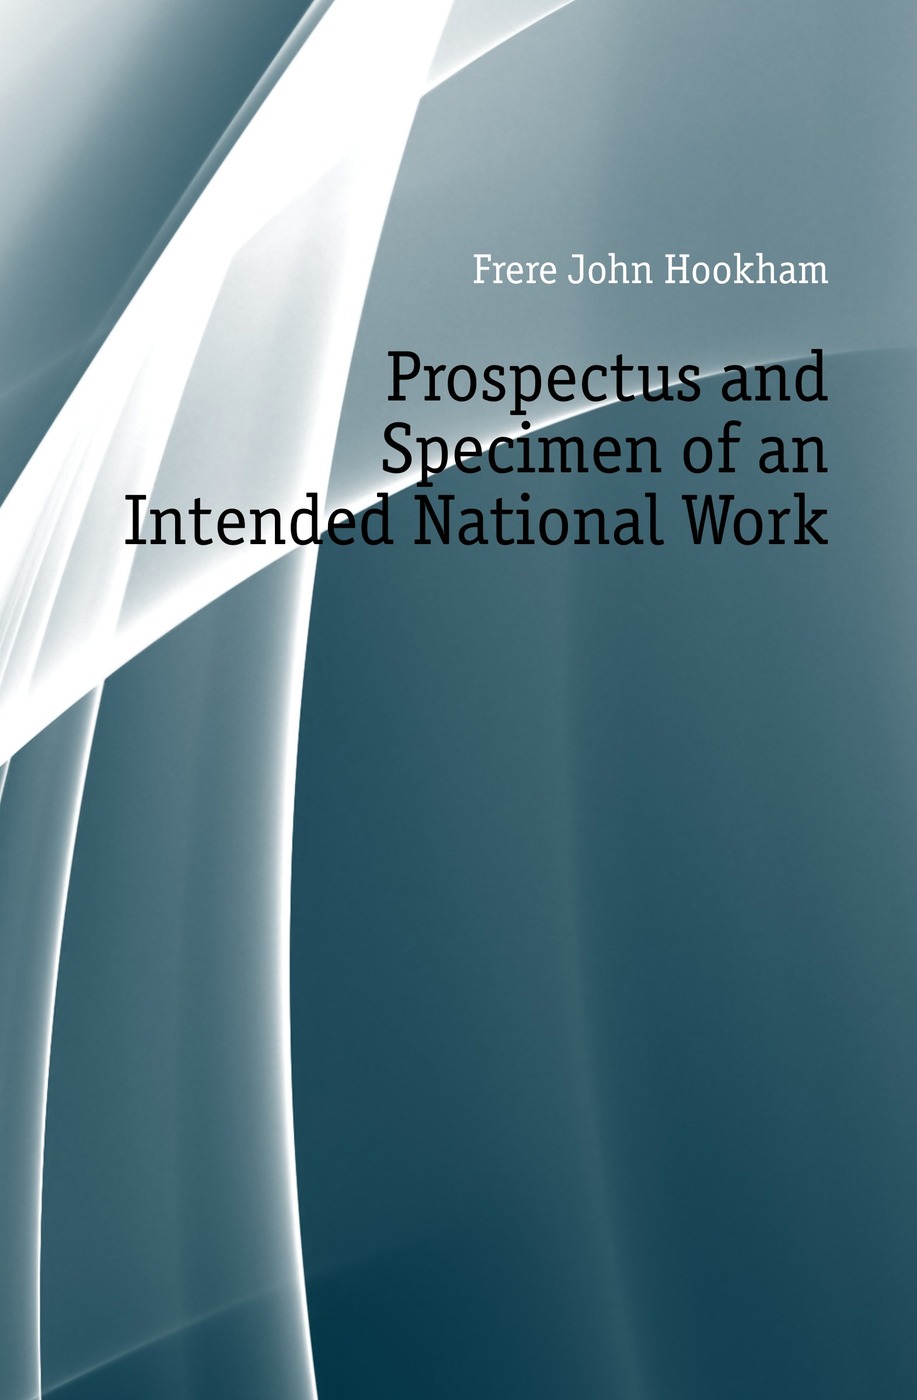 Prospectus and Specimen of an Intended National Work